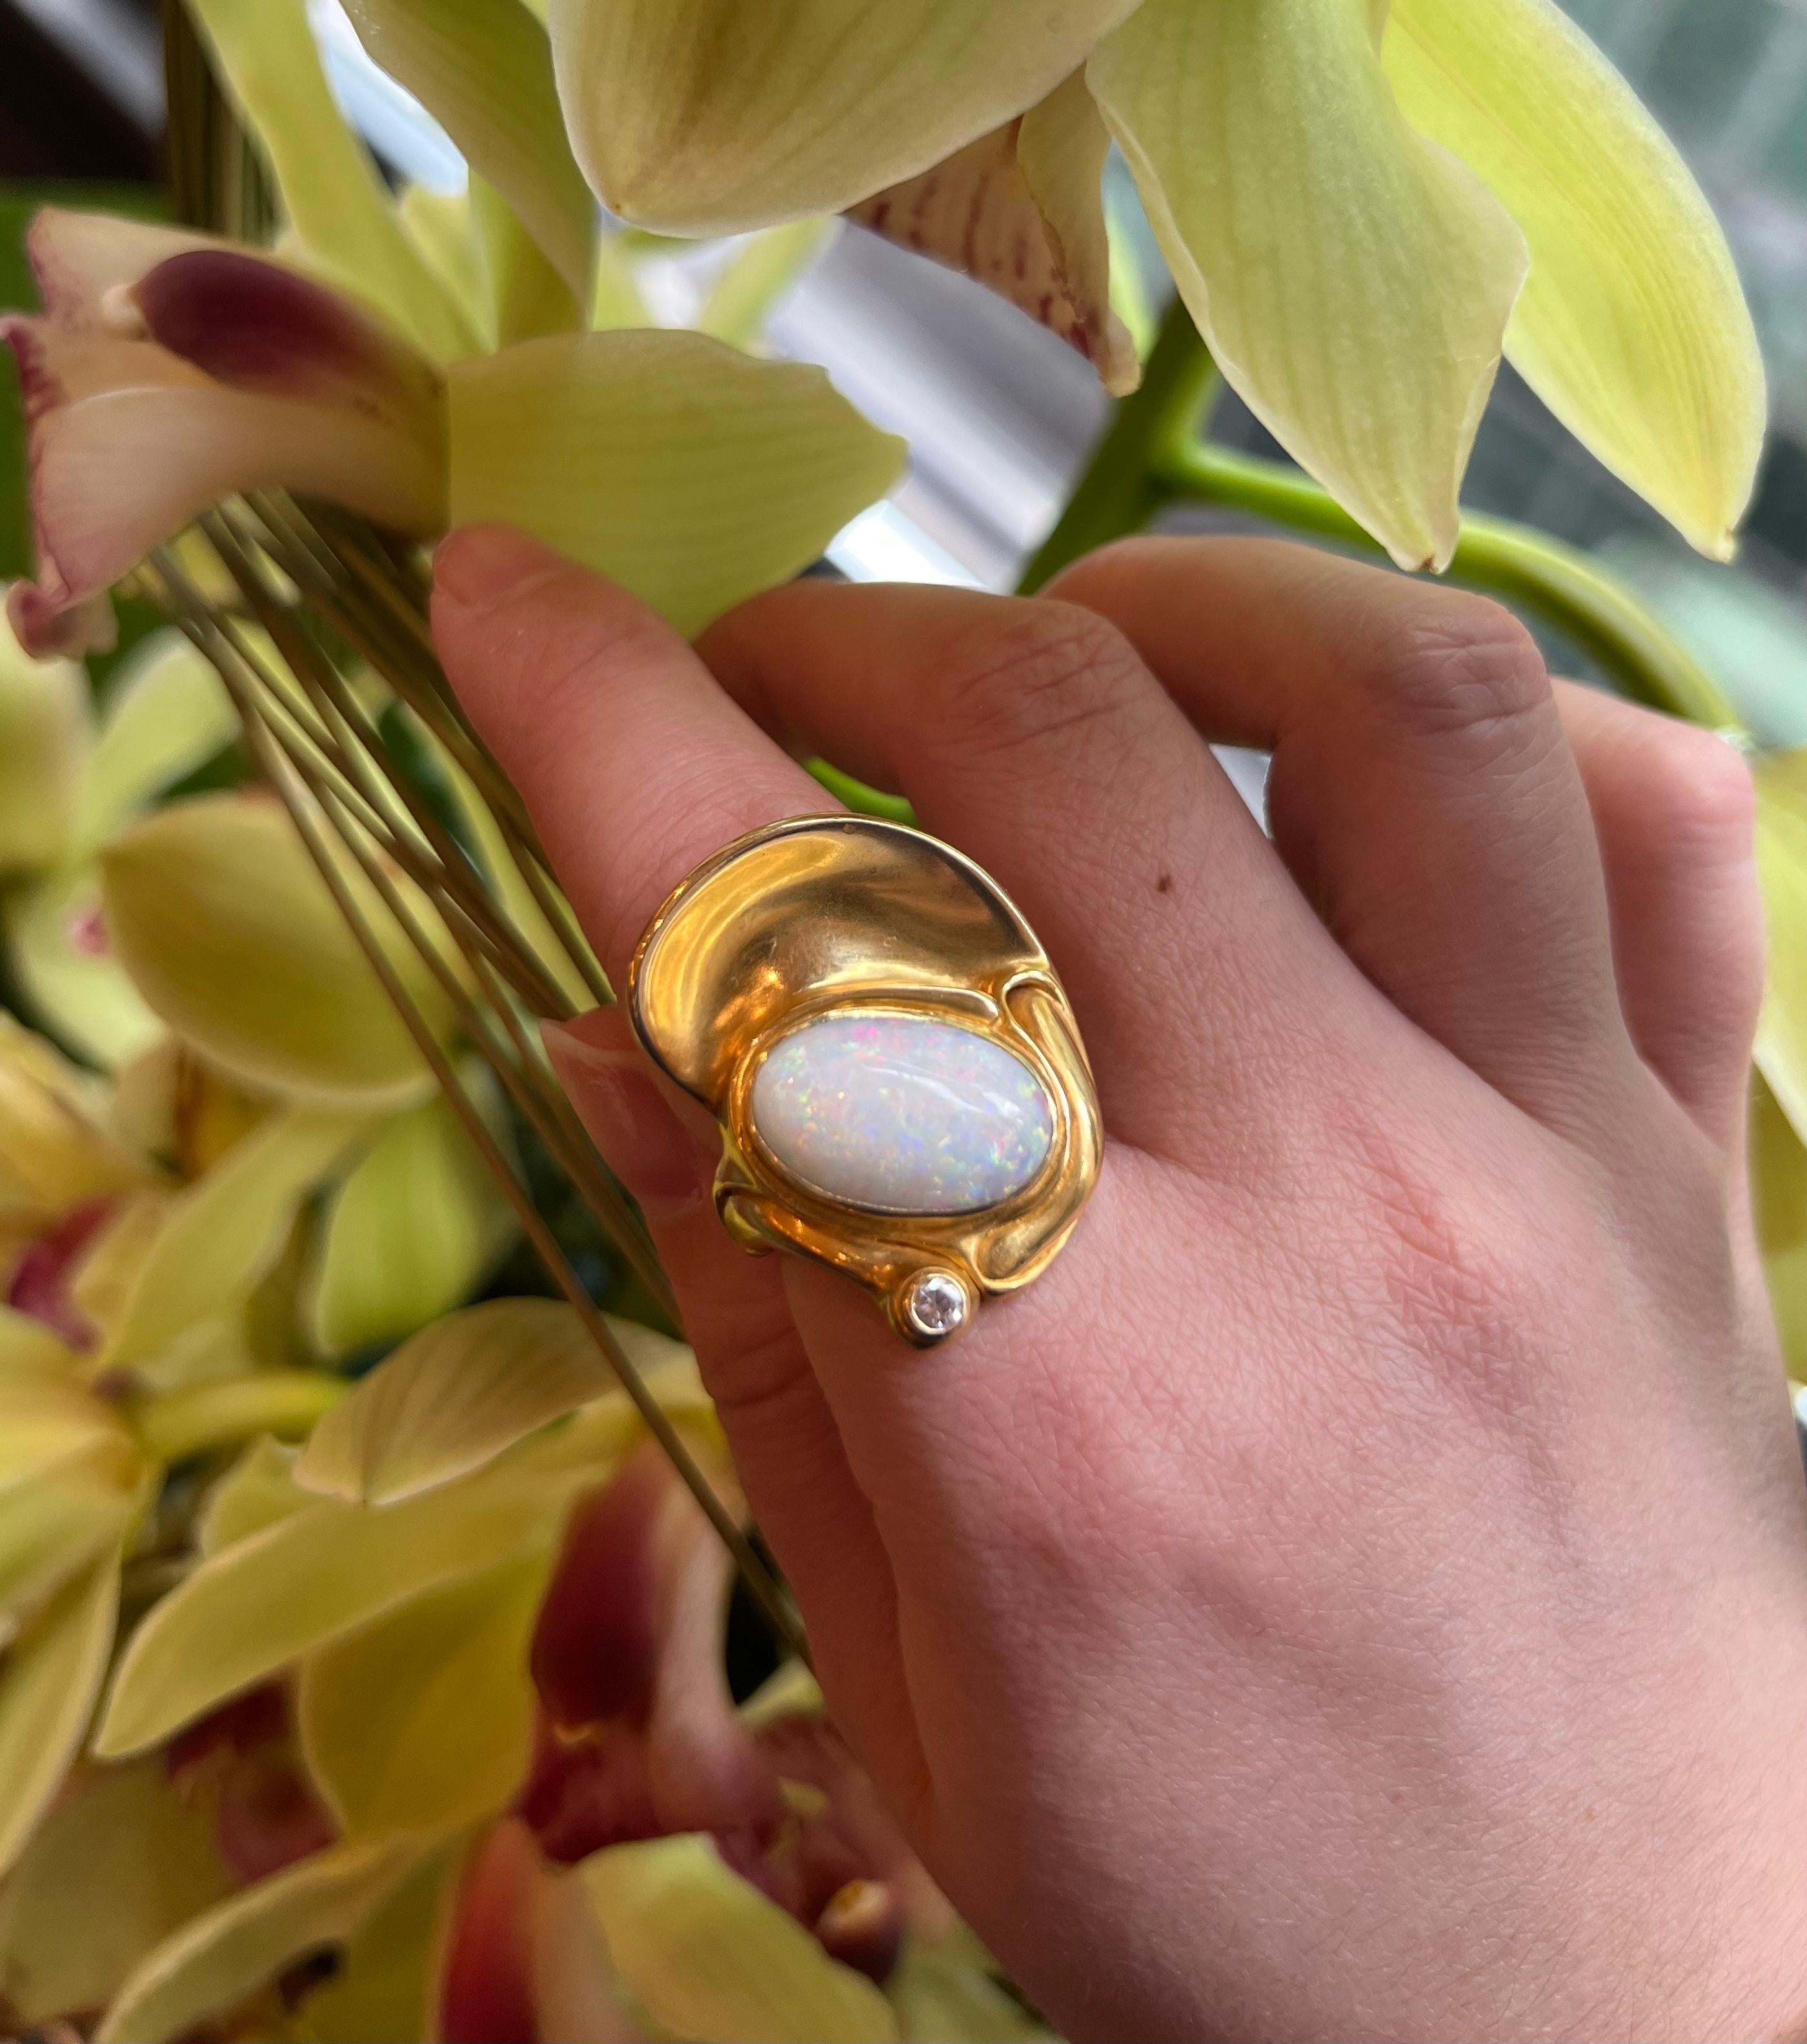 A unique white fire opal and diamond 18 karat yellow gold, art jewel, a ring by famed Belgian jeweler Fernand Demaret. Signed Demaret, 750, with makers mark. Ring size 7. This ring is not resizable.

In Demaret signature, this striking modernist